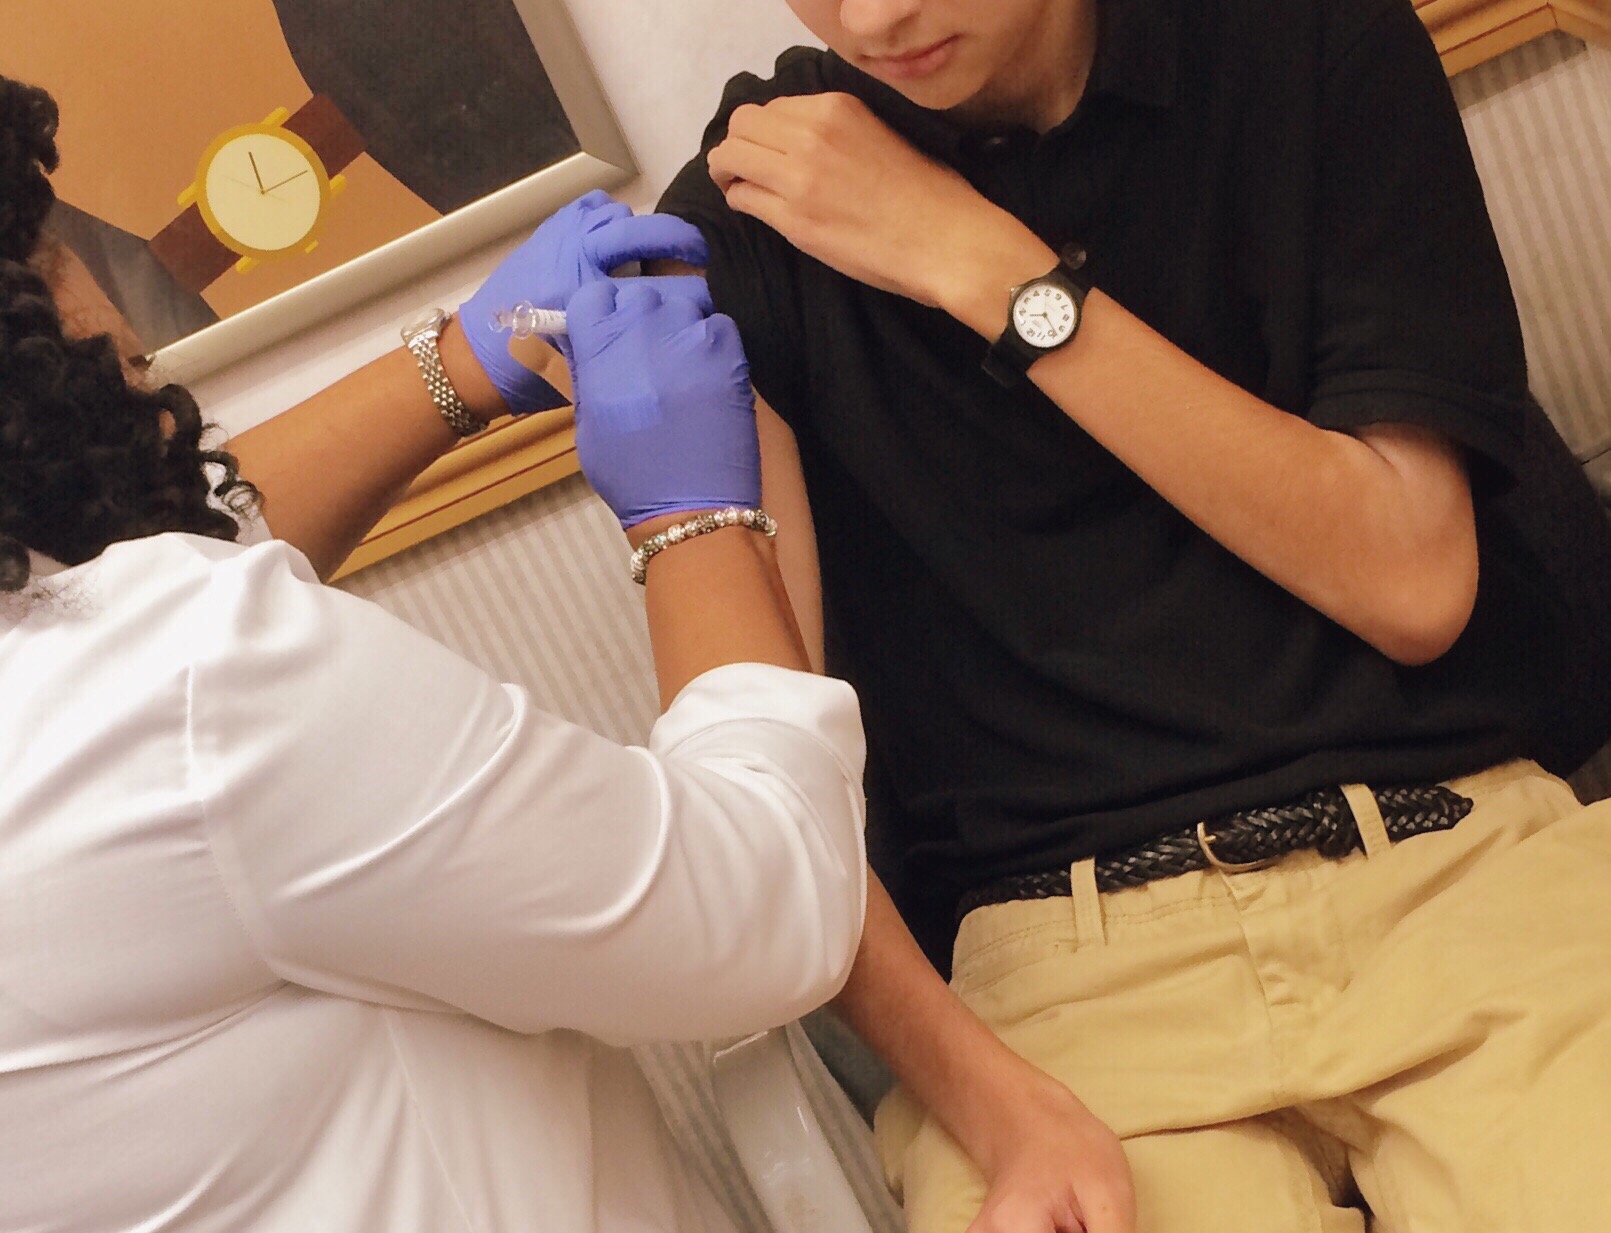 flu-shot-time-a-teen-is-getting-his-flu-shot-vaccine-which-it-s-offered-for-free-in-several-locations_t20_xvJNp1